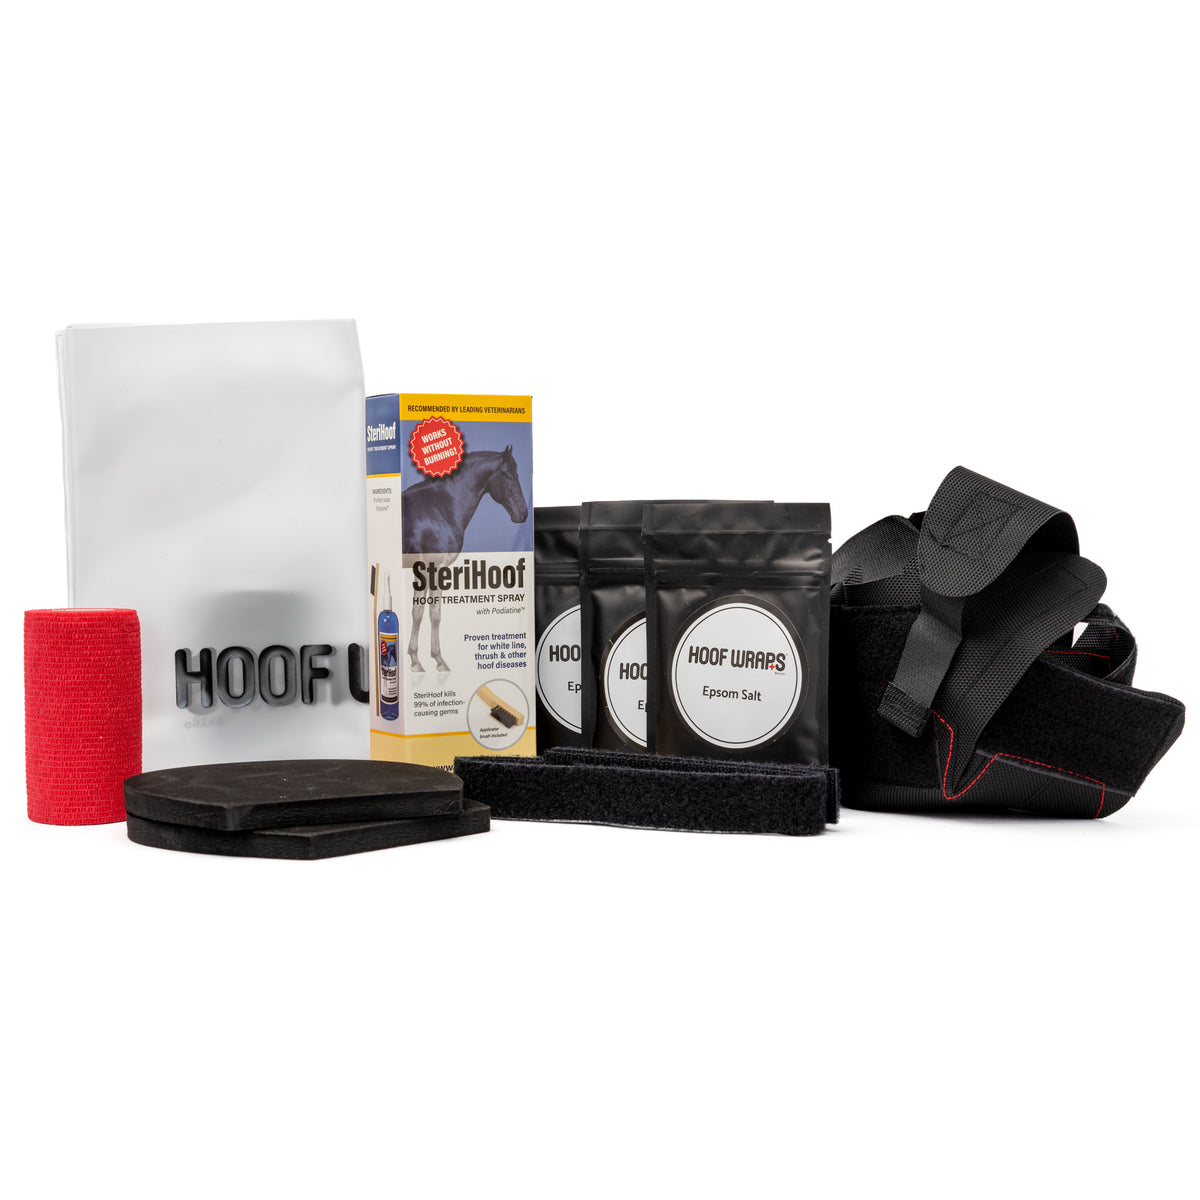 Hoof Abscess Treatment Kit: Everything you need